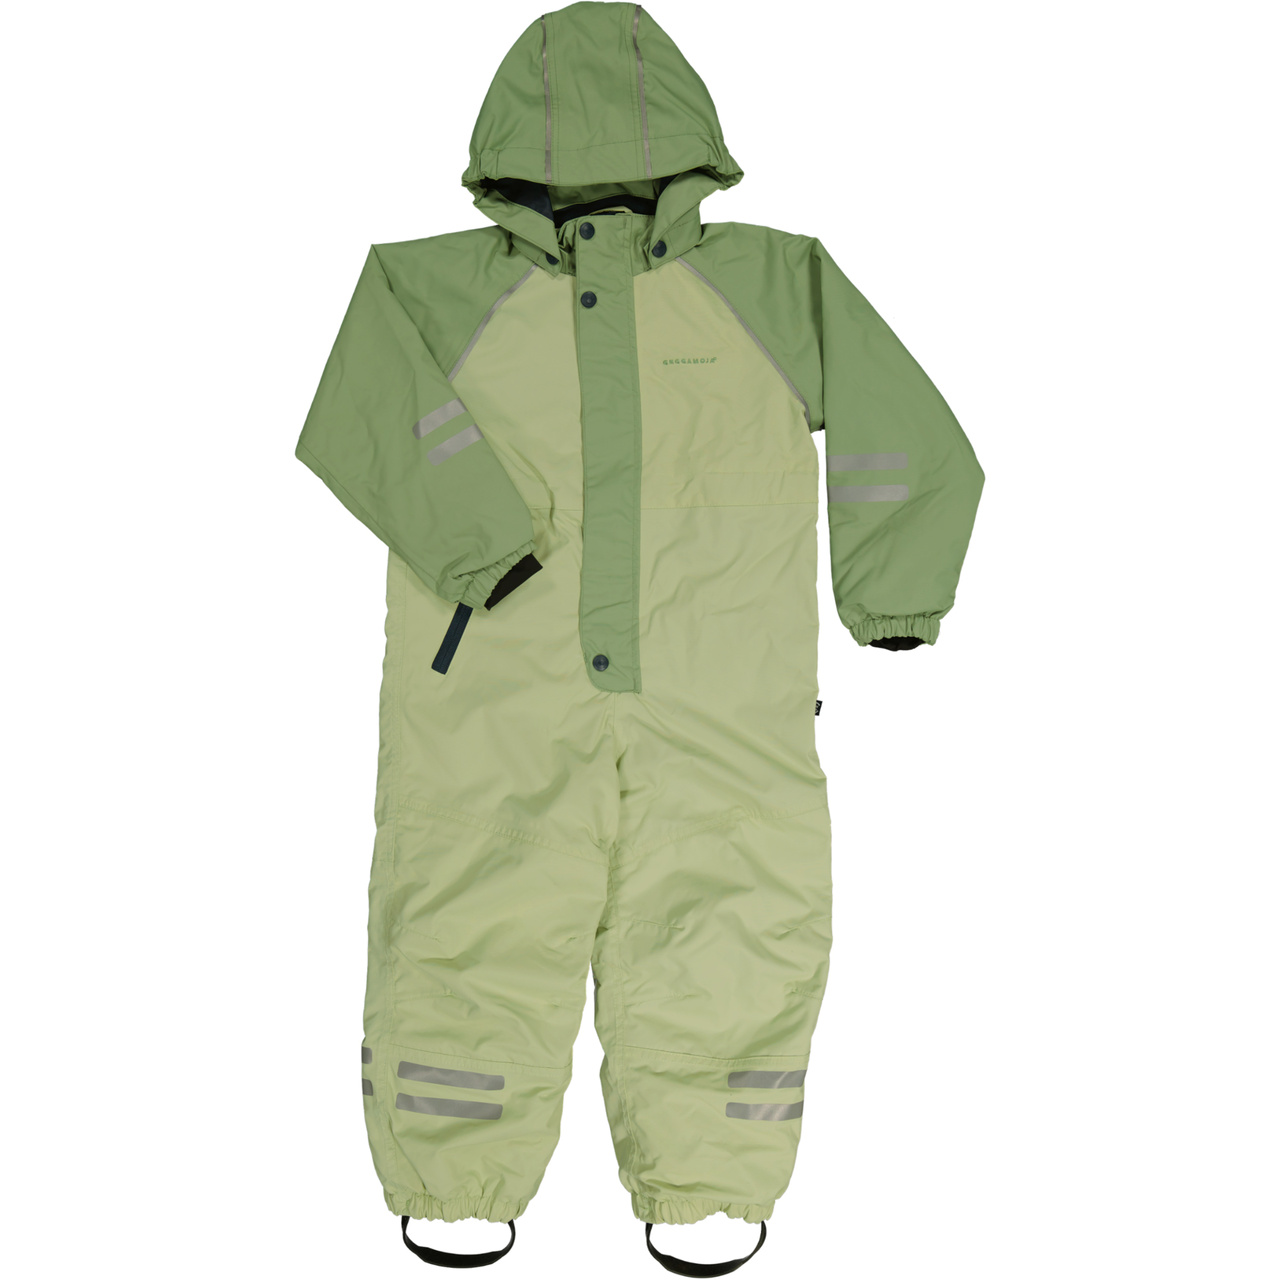 Shell overall Green 86/92